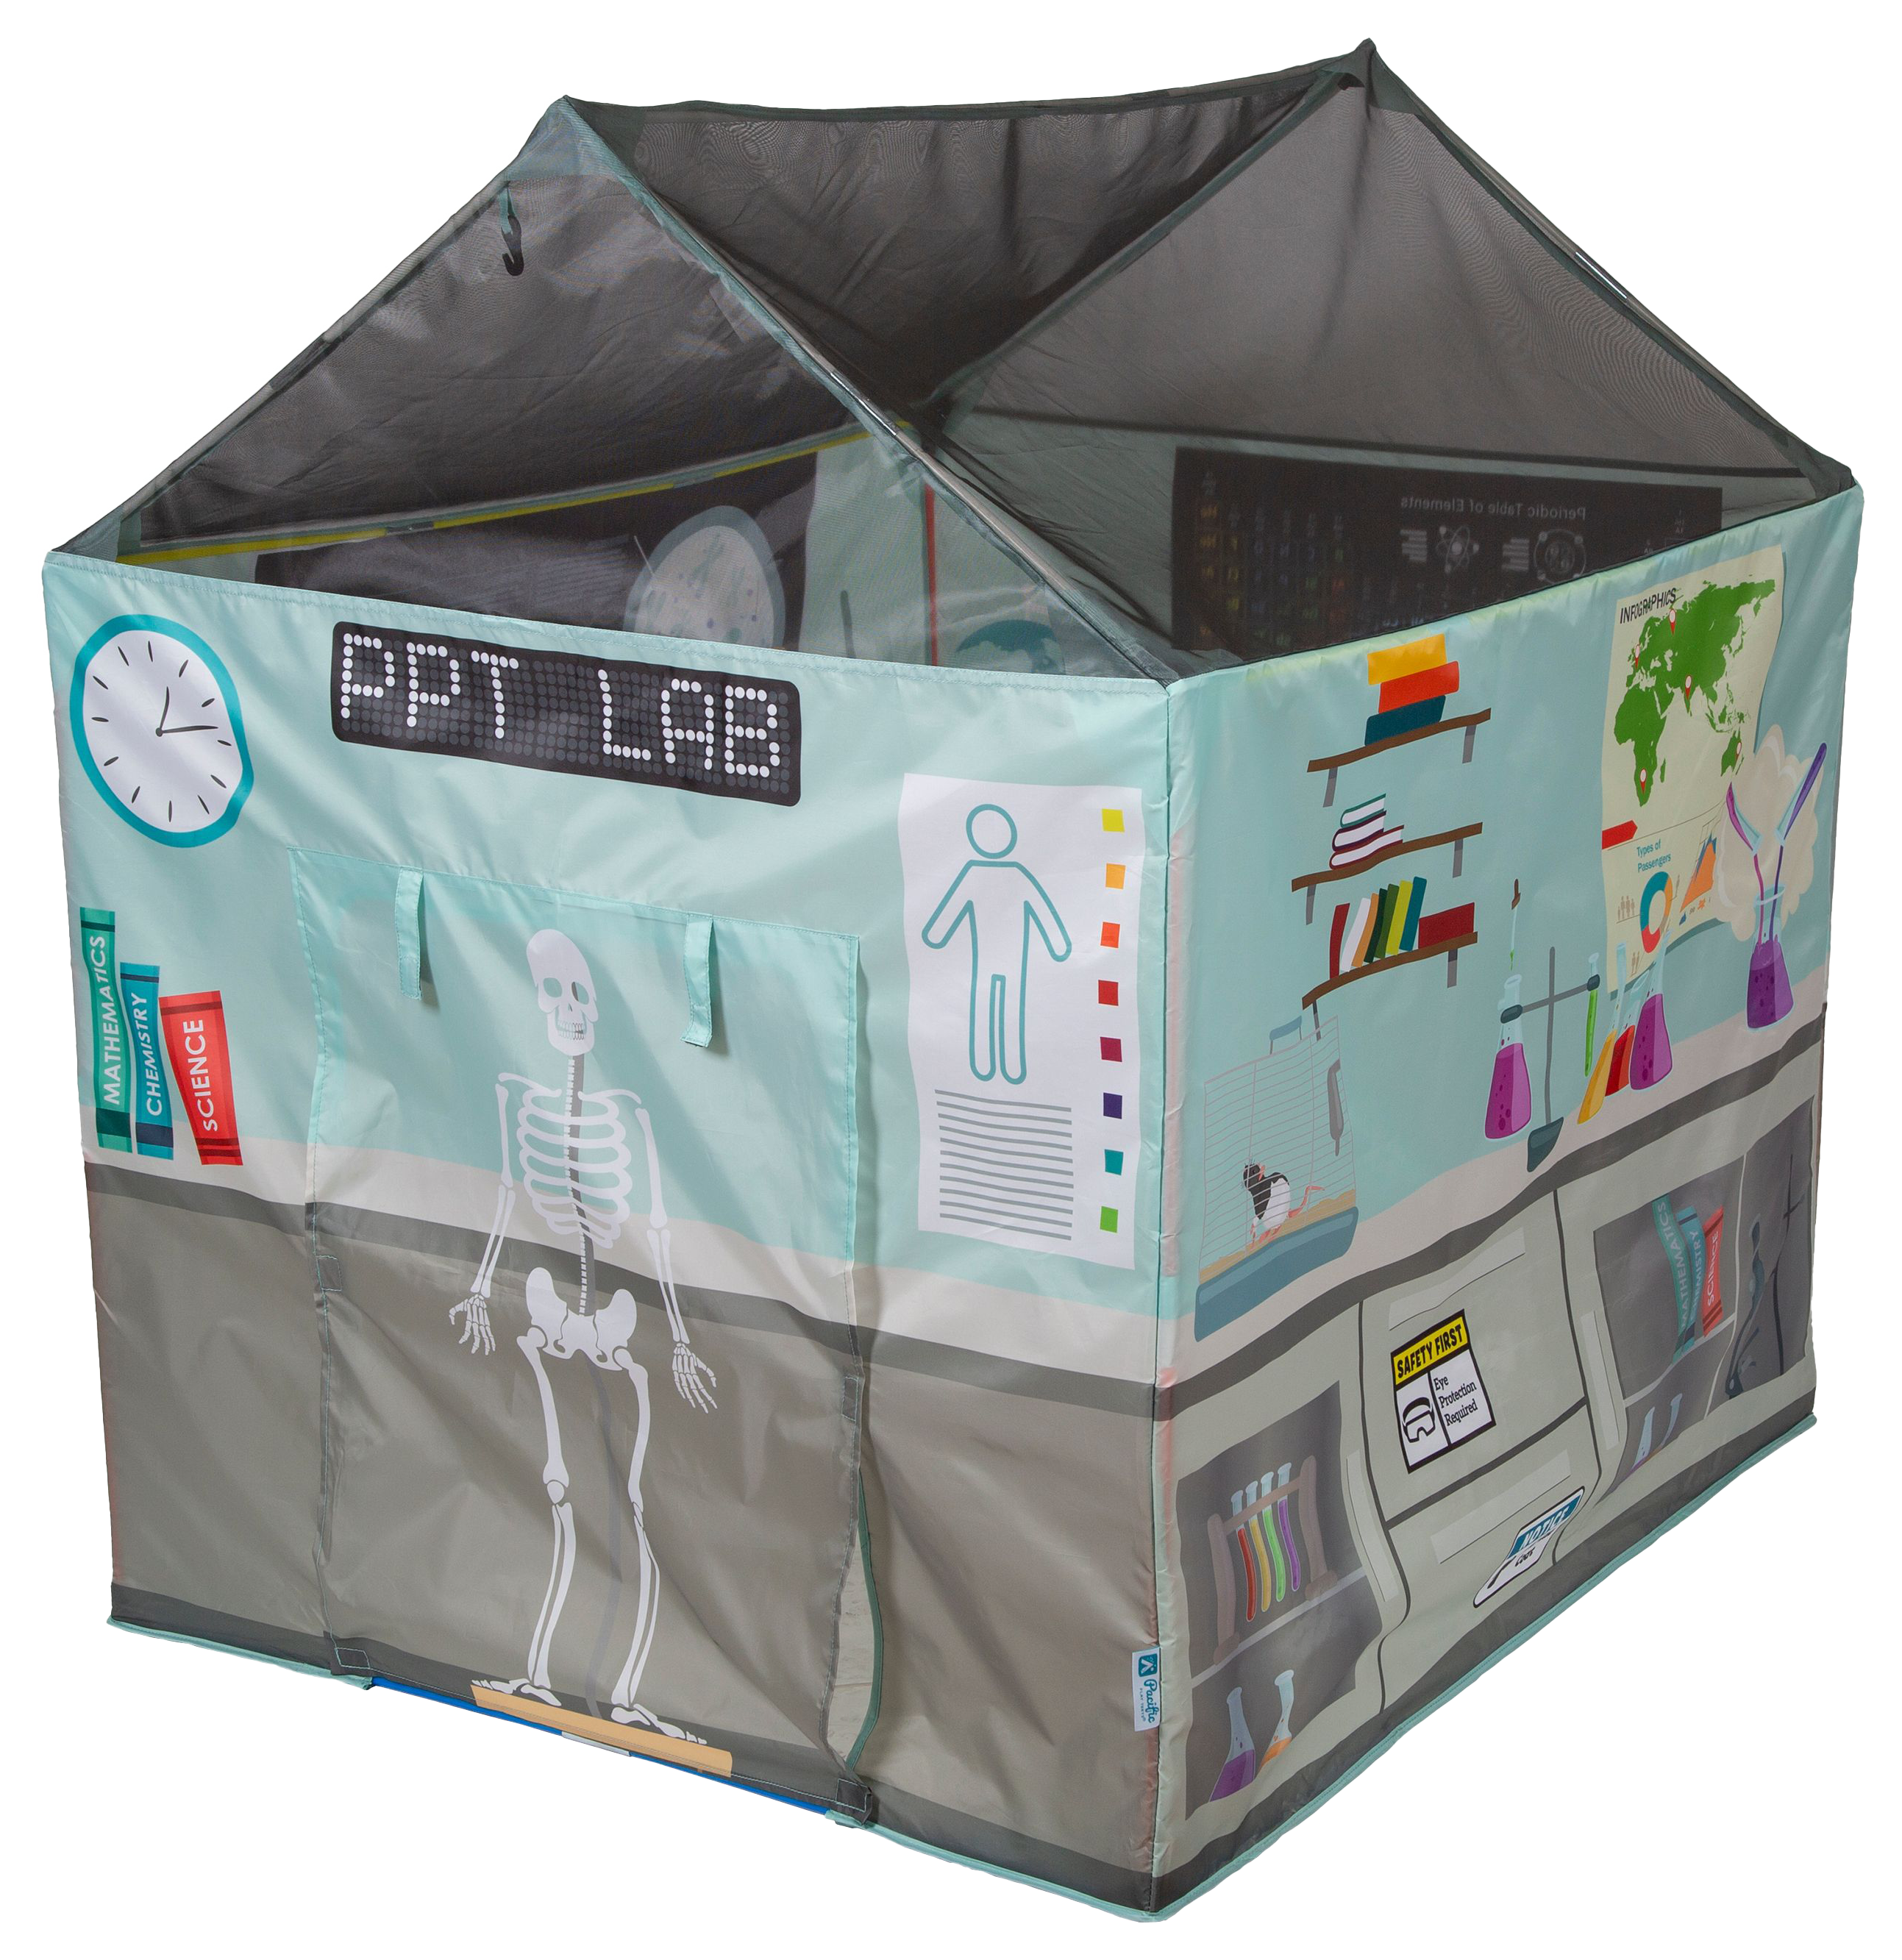 Pacific Play Tents Science Center Play House for Kids